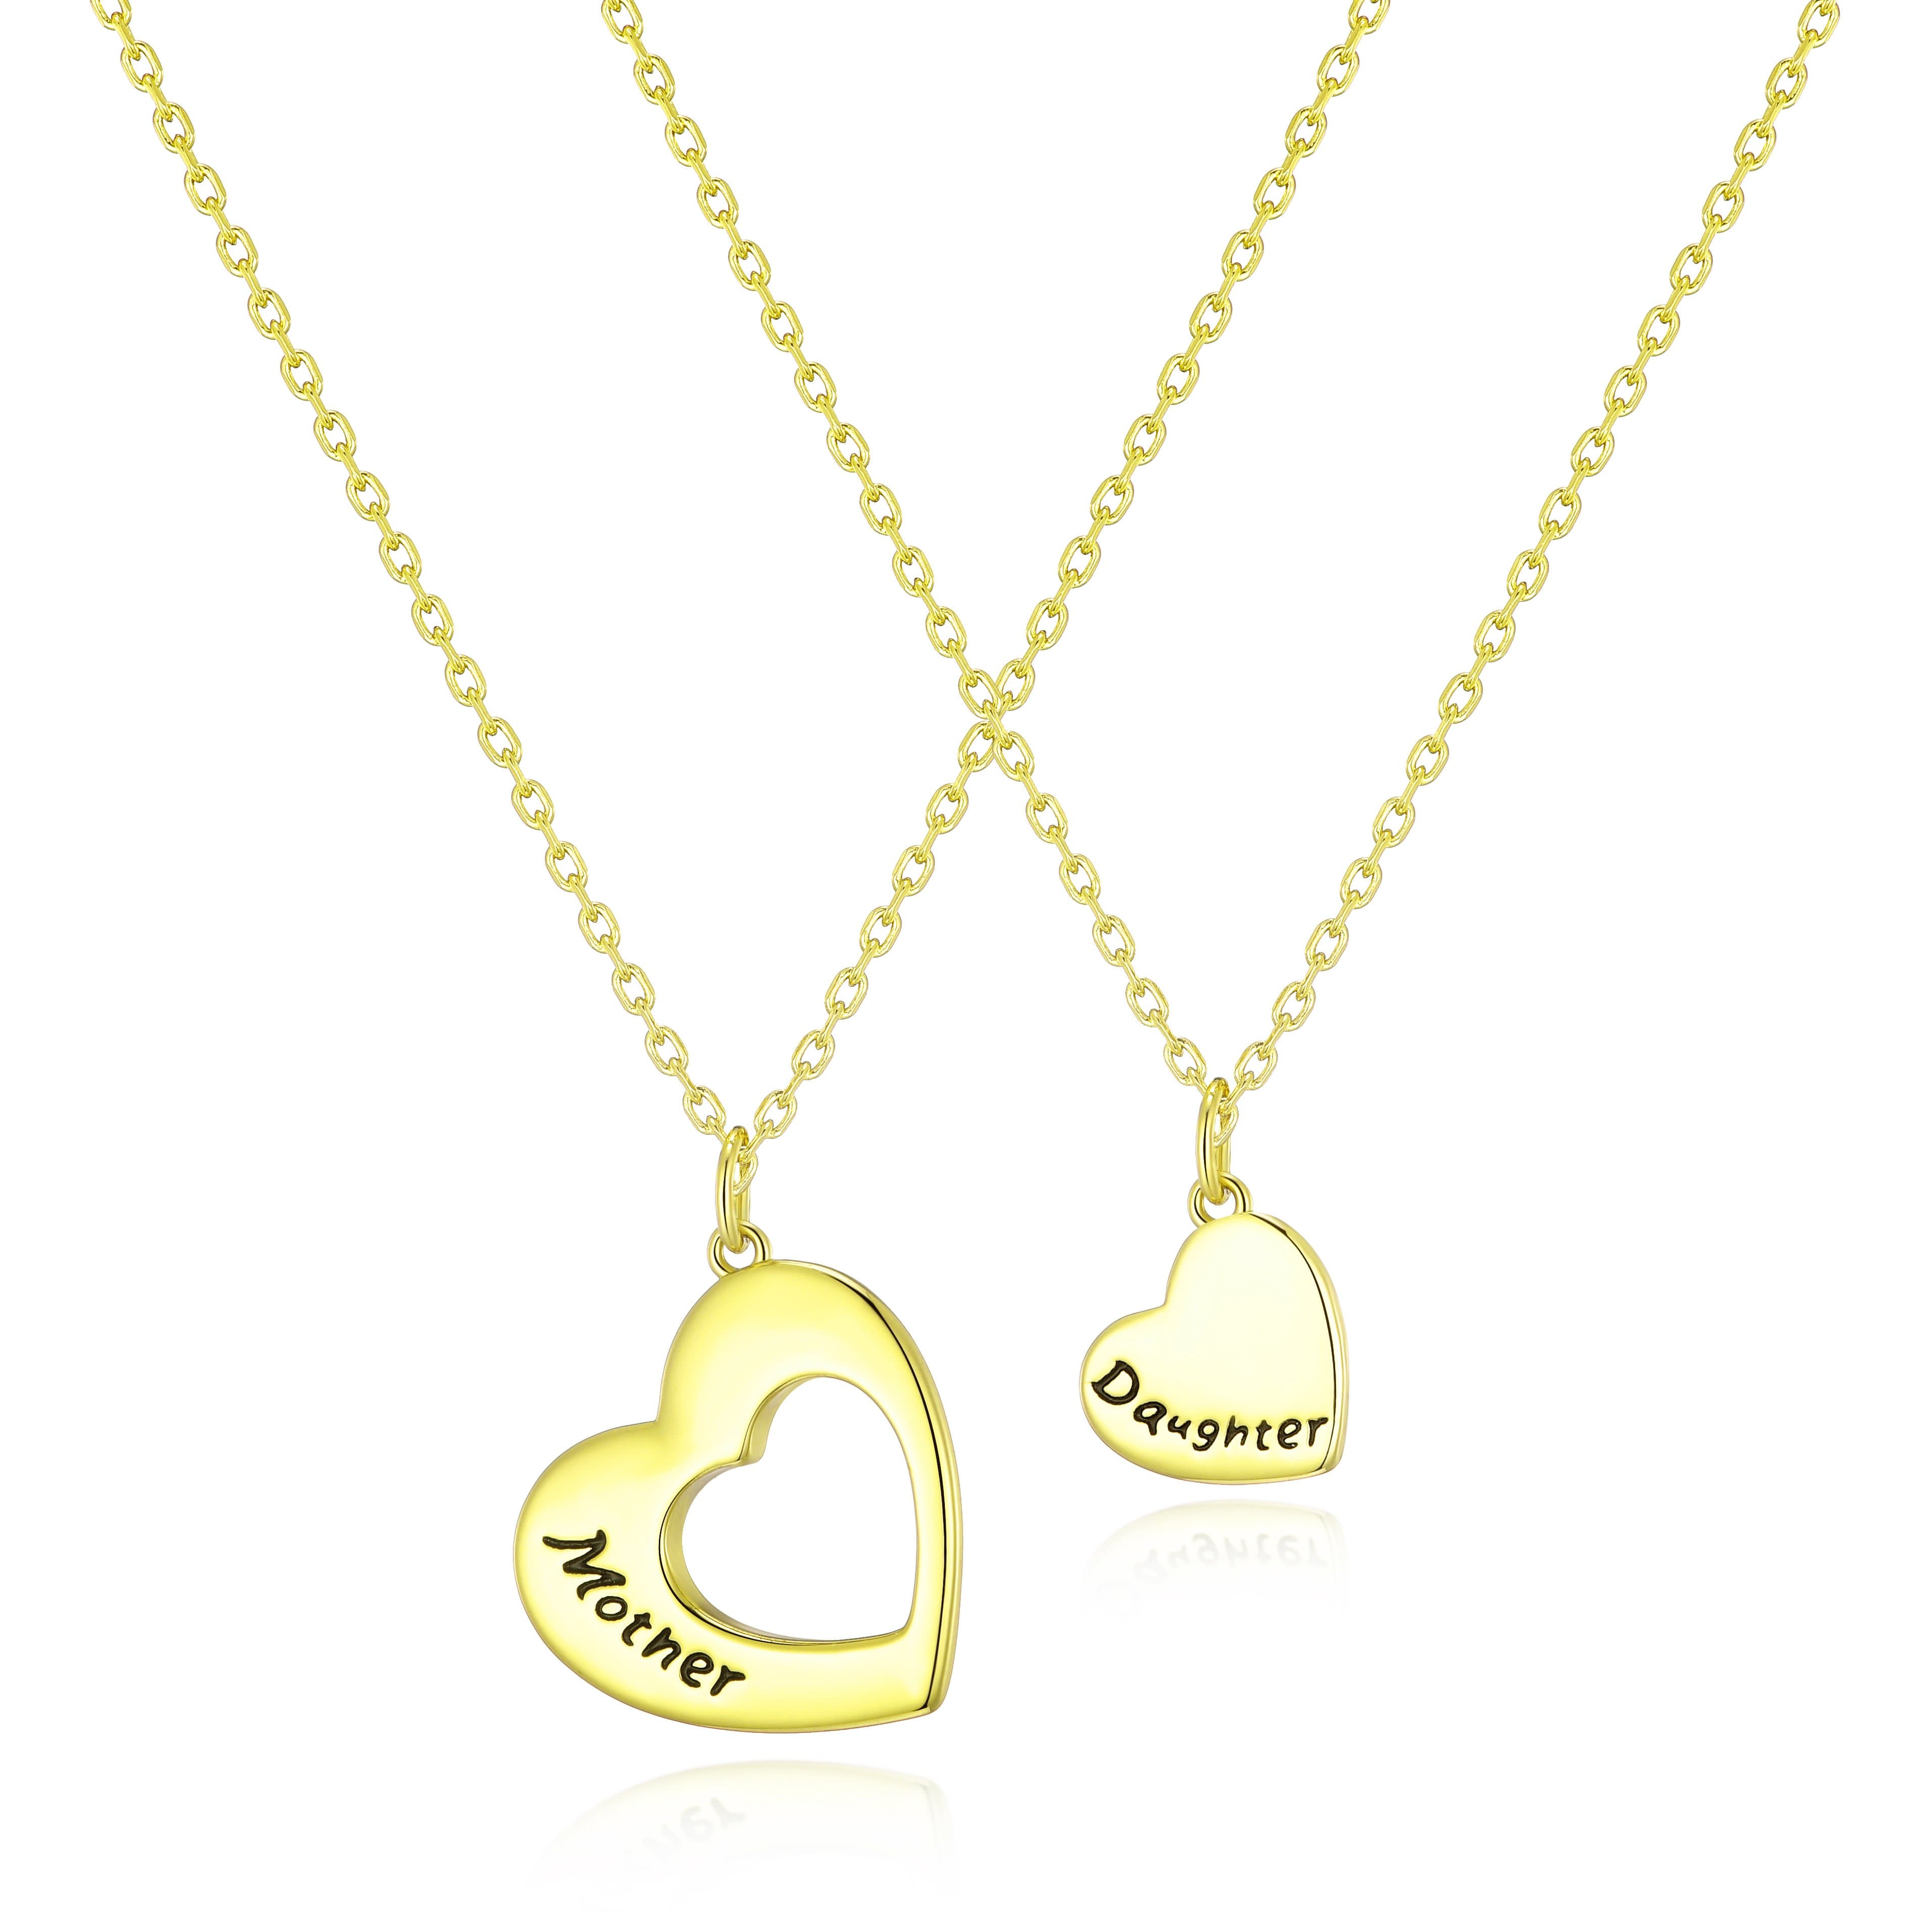 Gold Plated Mother and Daughter Necklace Set with Quote Card